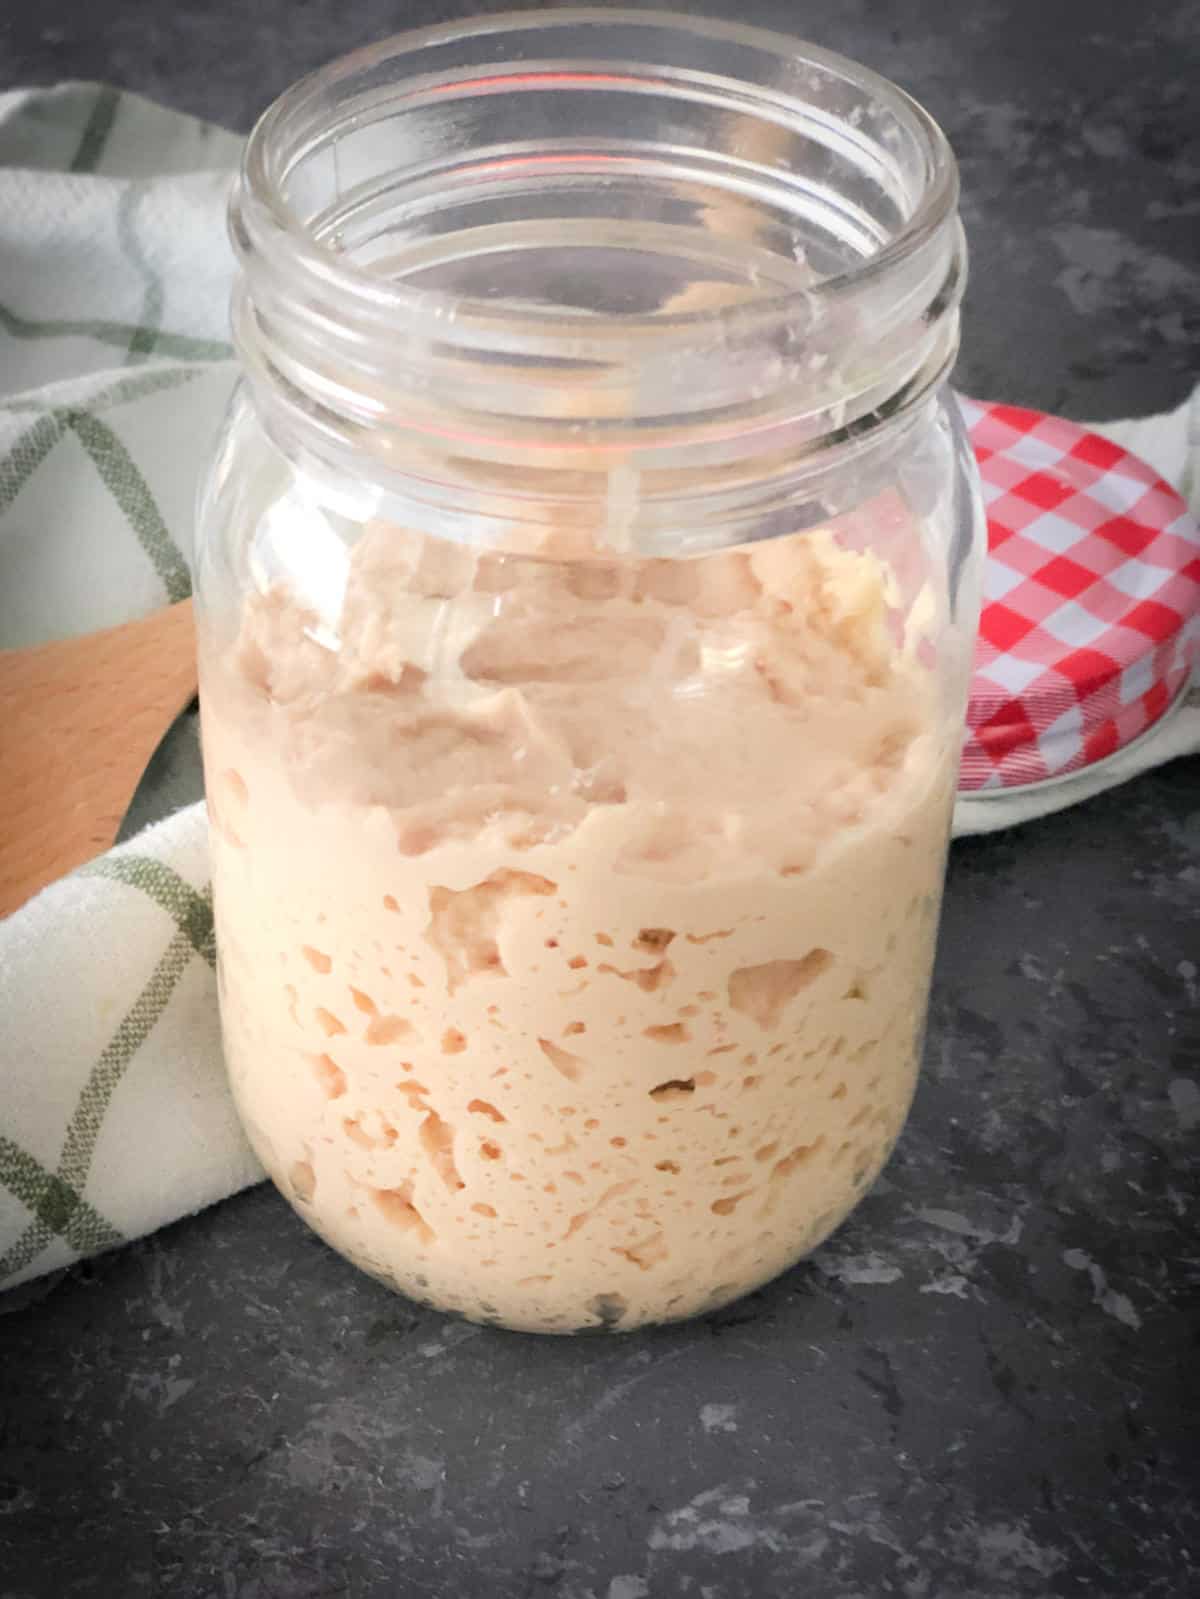 Sourdough starter made with atta placed in a jar.